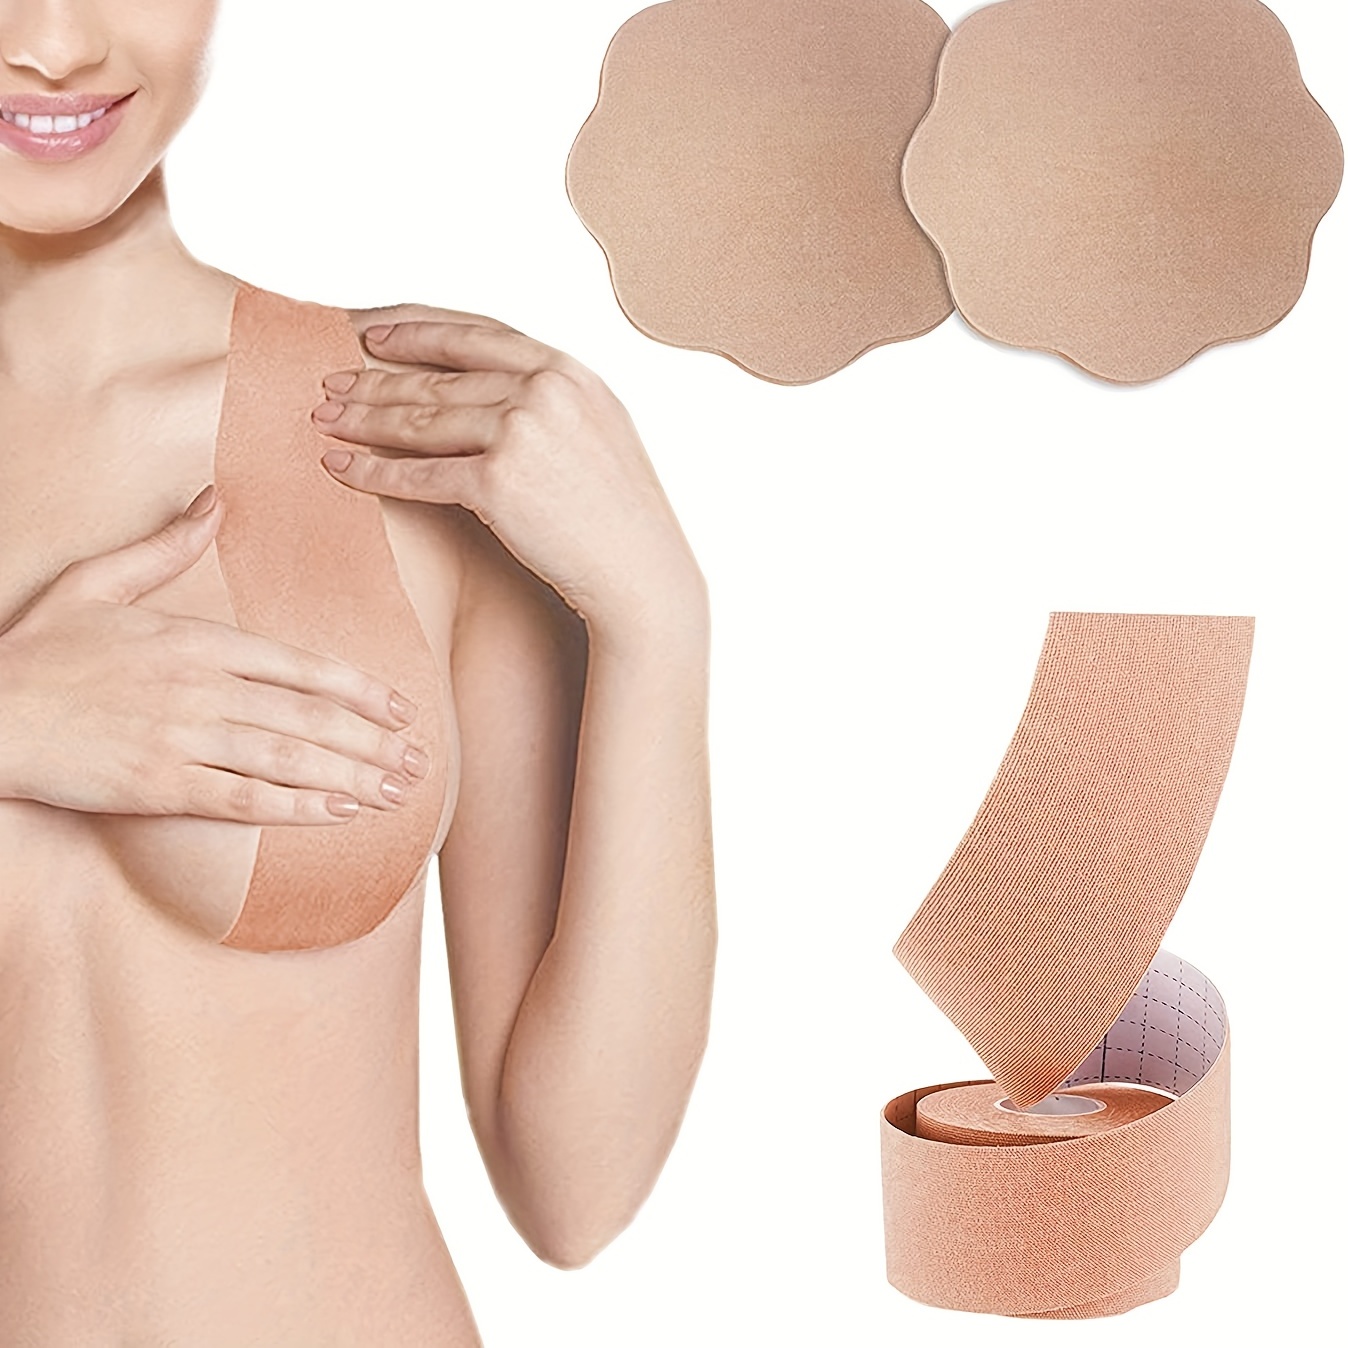 XL Boob Tape Breast Lift Tape for Contour Lift Fashion Boobytape Athletic  Tape for Breasts Body Tape for Lift Push up in All Clothing Fabric Dress  Types Waterproof Sweatproof Invisible Beige